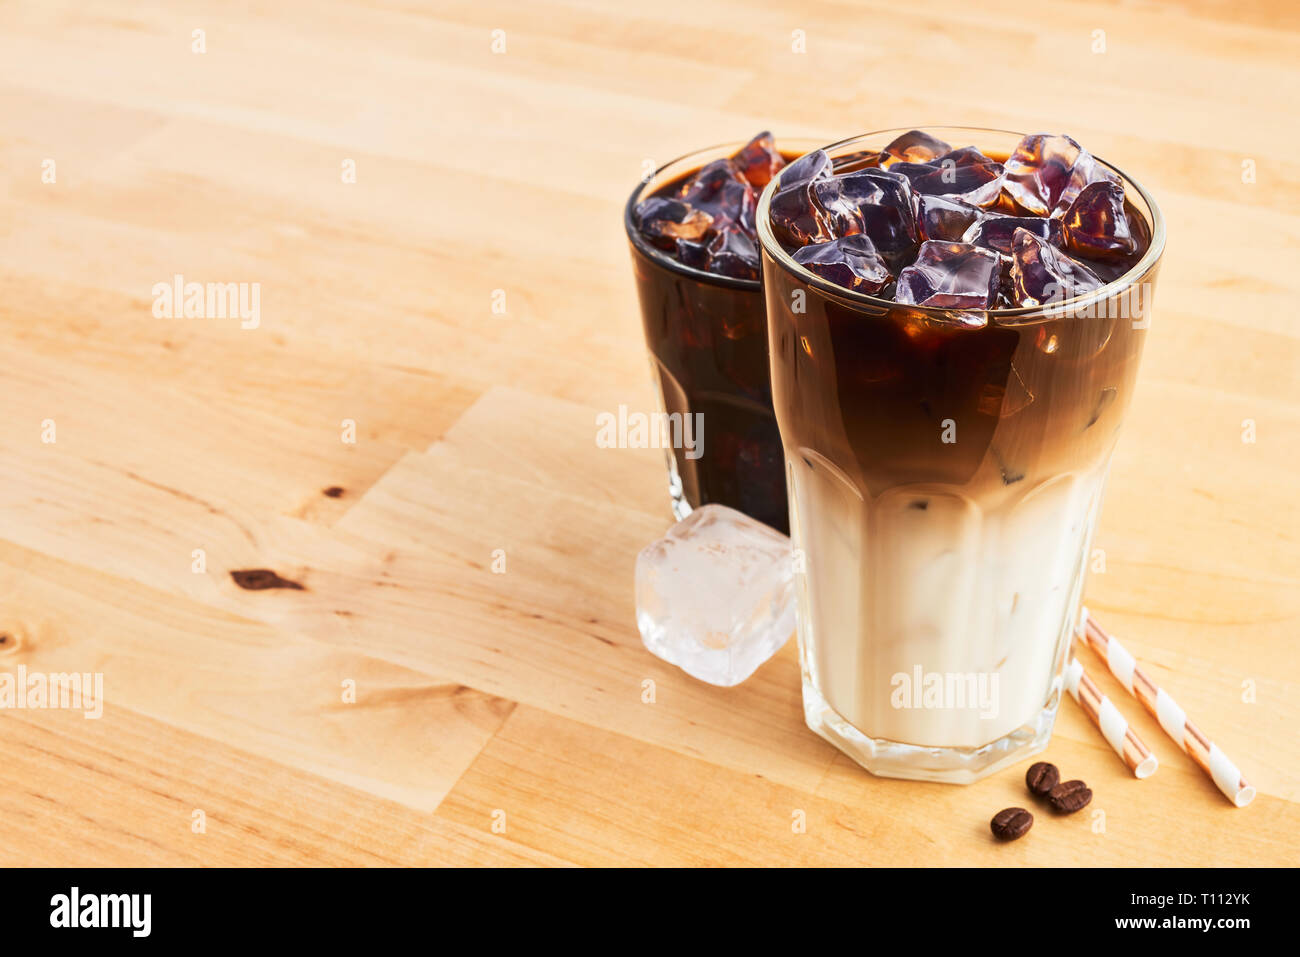 Iced coffee and latte macchiato in tall glass with straws on wooden table. Various types of coffee. Copy space for text. Stock Photo